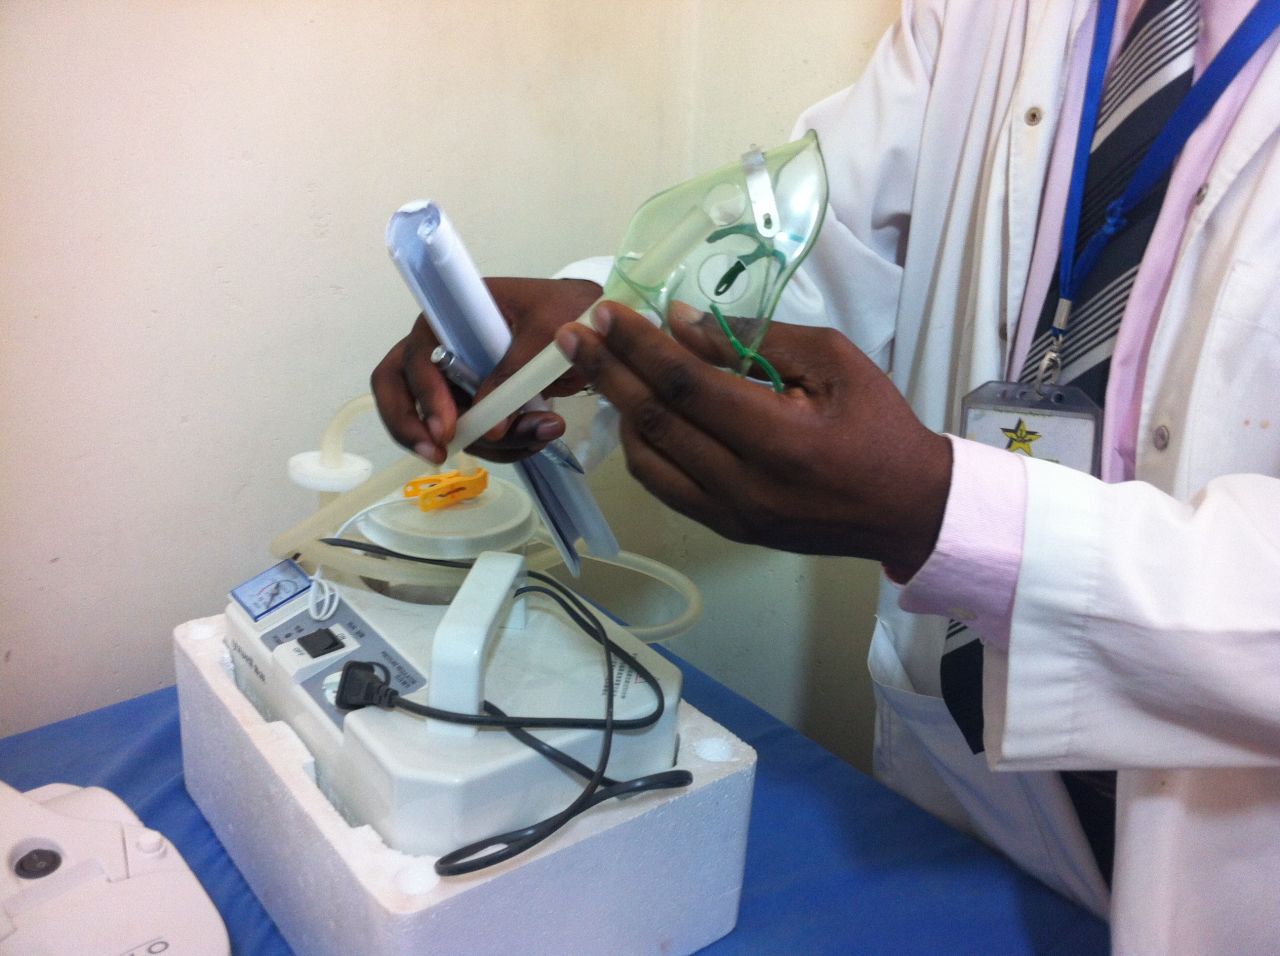 Sputum induction involves the use of a nebulizer and tubing to stimulate sputum production within a child's larynx to then suck it up for sampling.